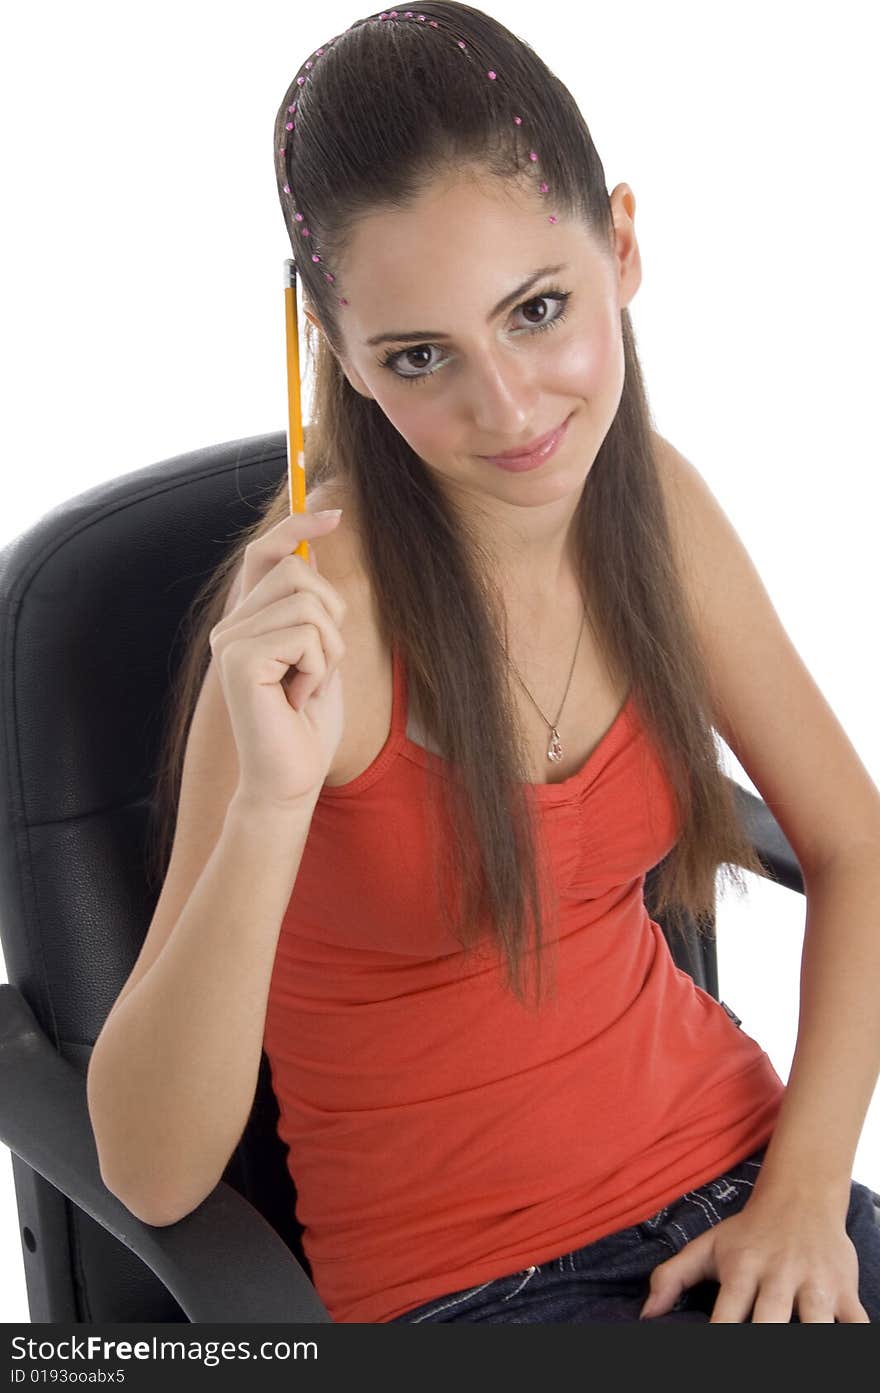 Teenager girl holding pencil and looking at camera on an isolated white background